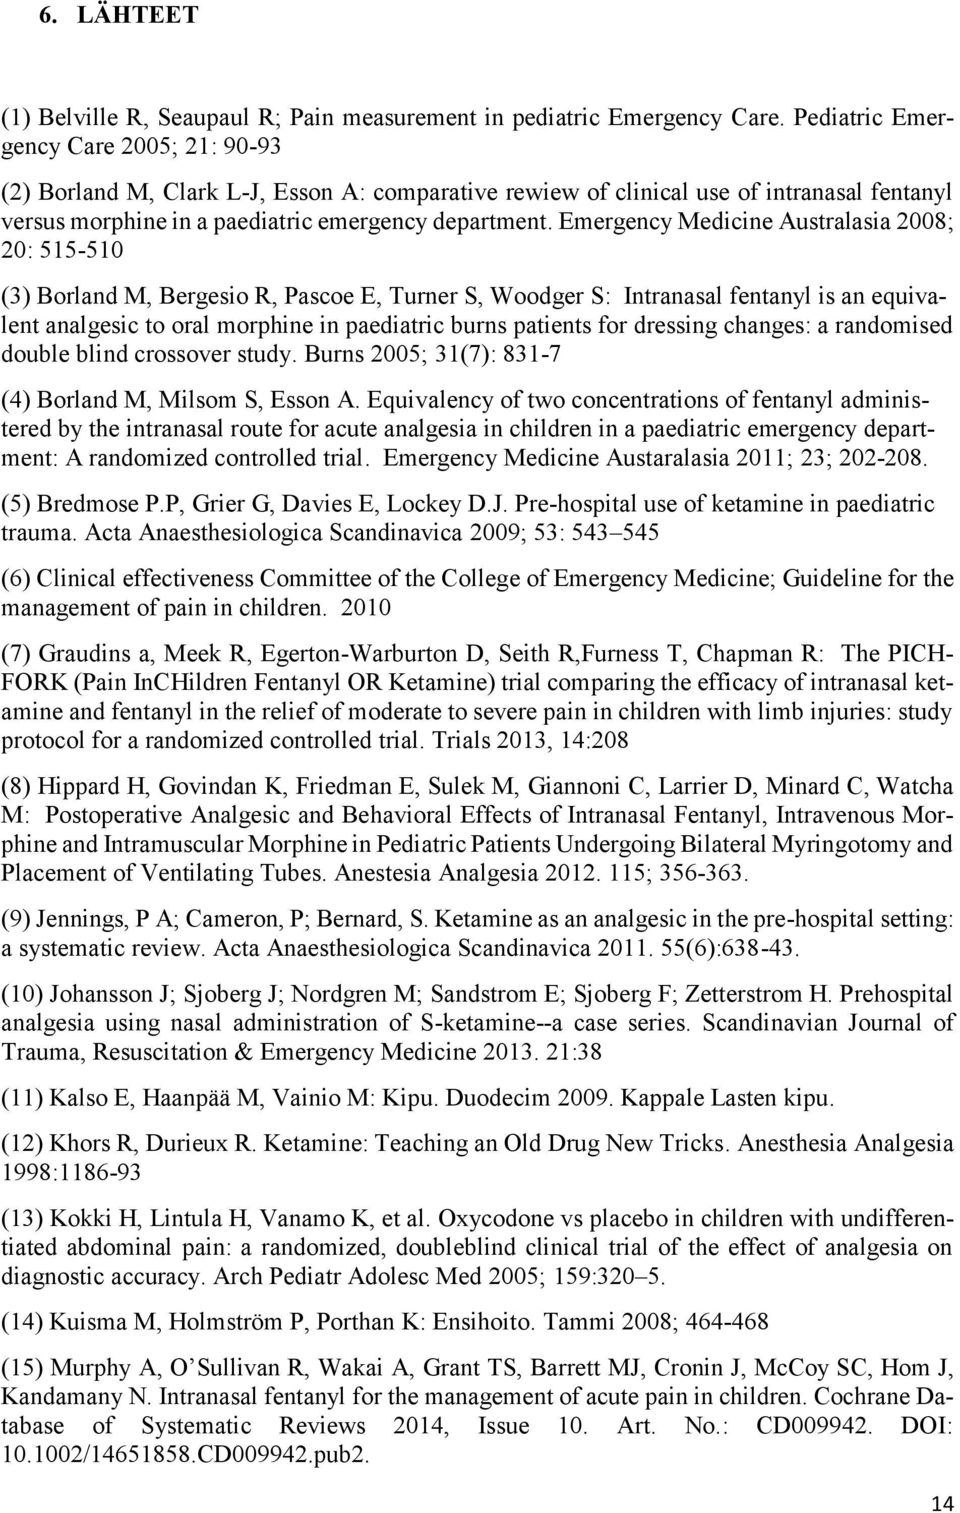 Emergency Medicine Australasia 2008; 20: 515-510 (3) Borland M, Bergesio R, Pascoe E, Turner S, Woodger S: Intranasal fentanyl is an equivalent analgesic to oral morphine in paediatric burns patients